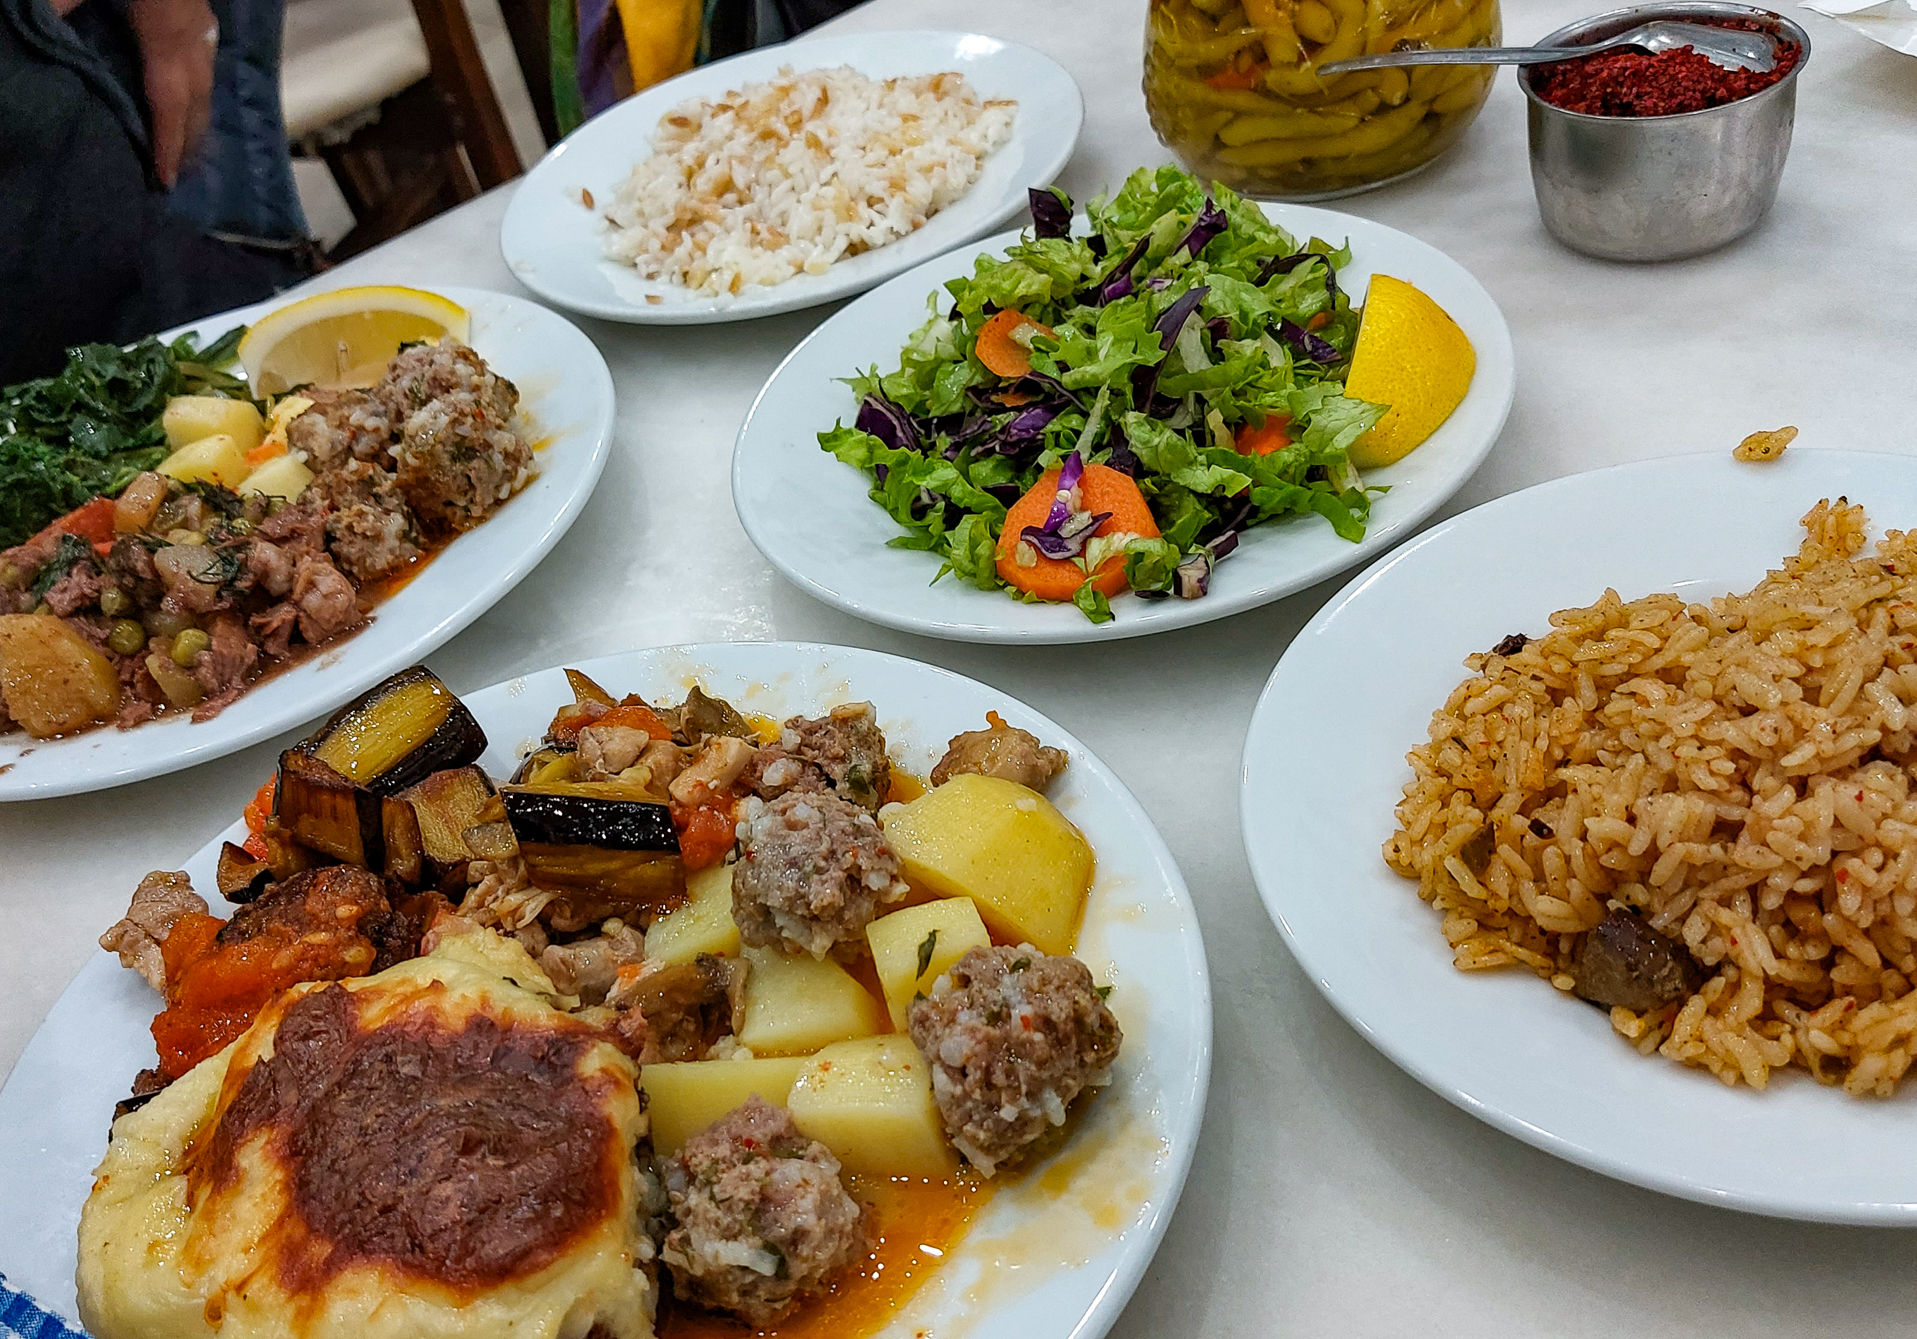 <span  class="uc_style_uc_tiles_grid_image_elementor_uc_items_attribute_title" style="color:#FFFFFF;">Whenever we can, we have beautiful Turkish food</span>